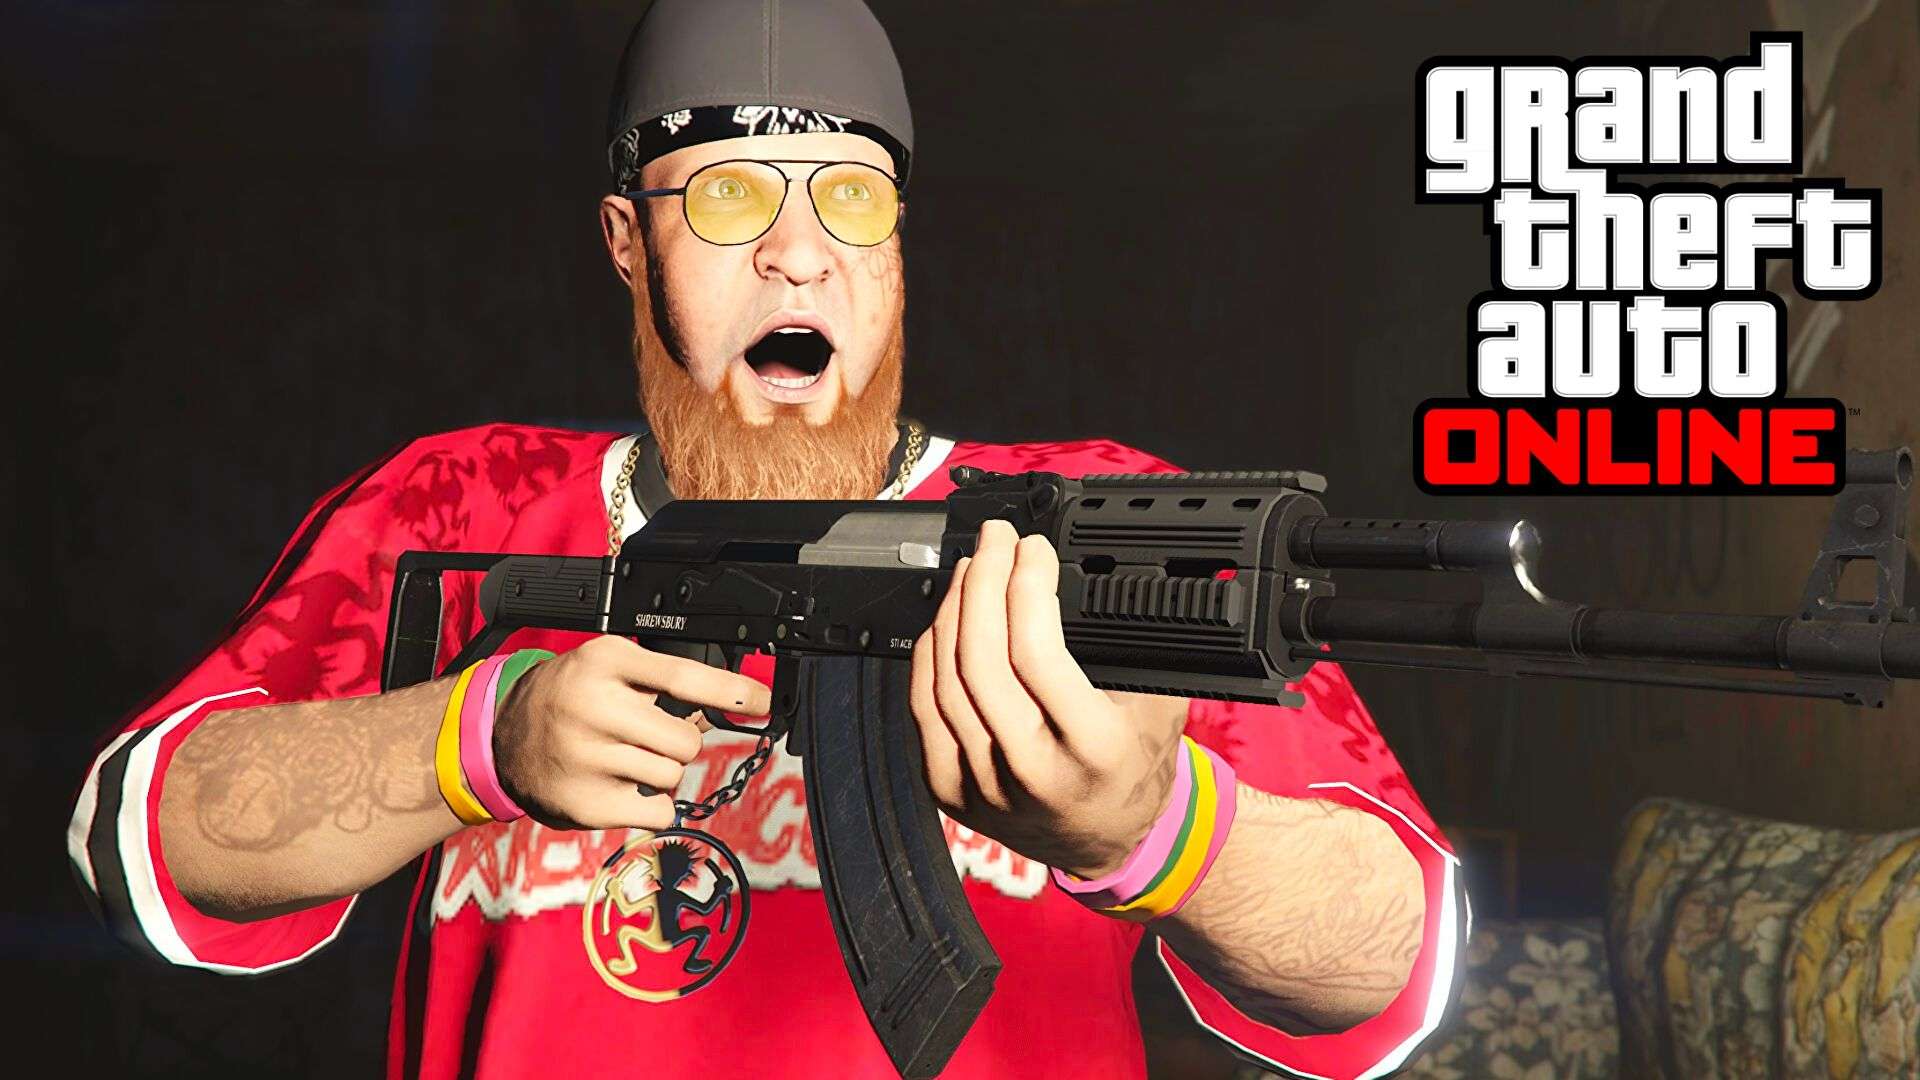 Dax in GTA Online holding assault rifle and shouting